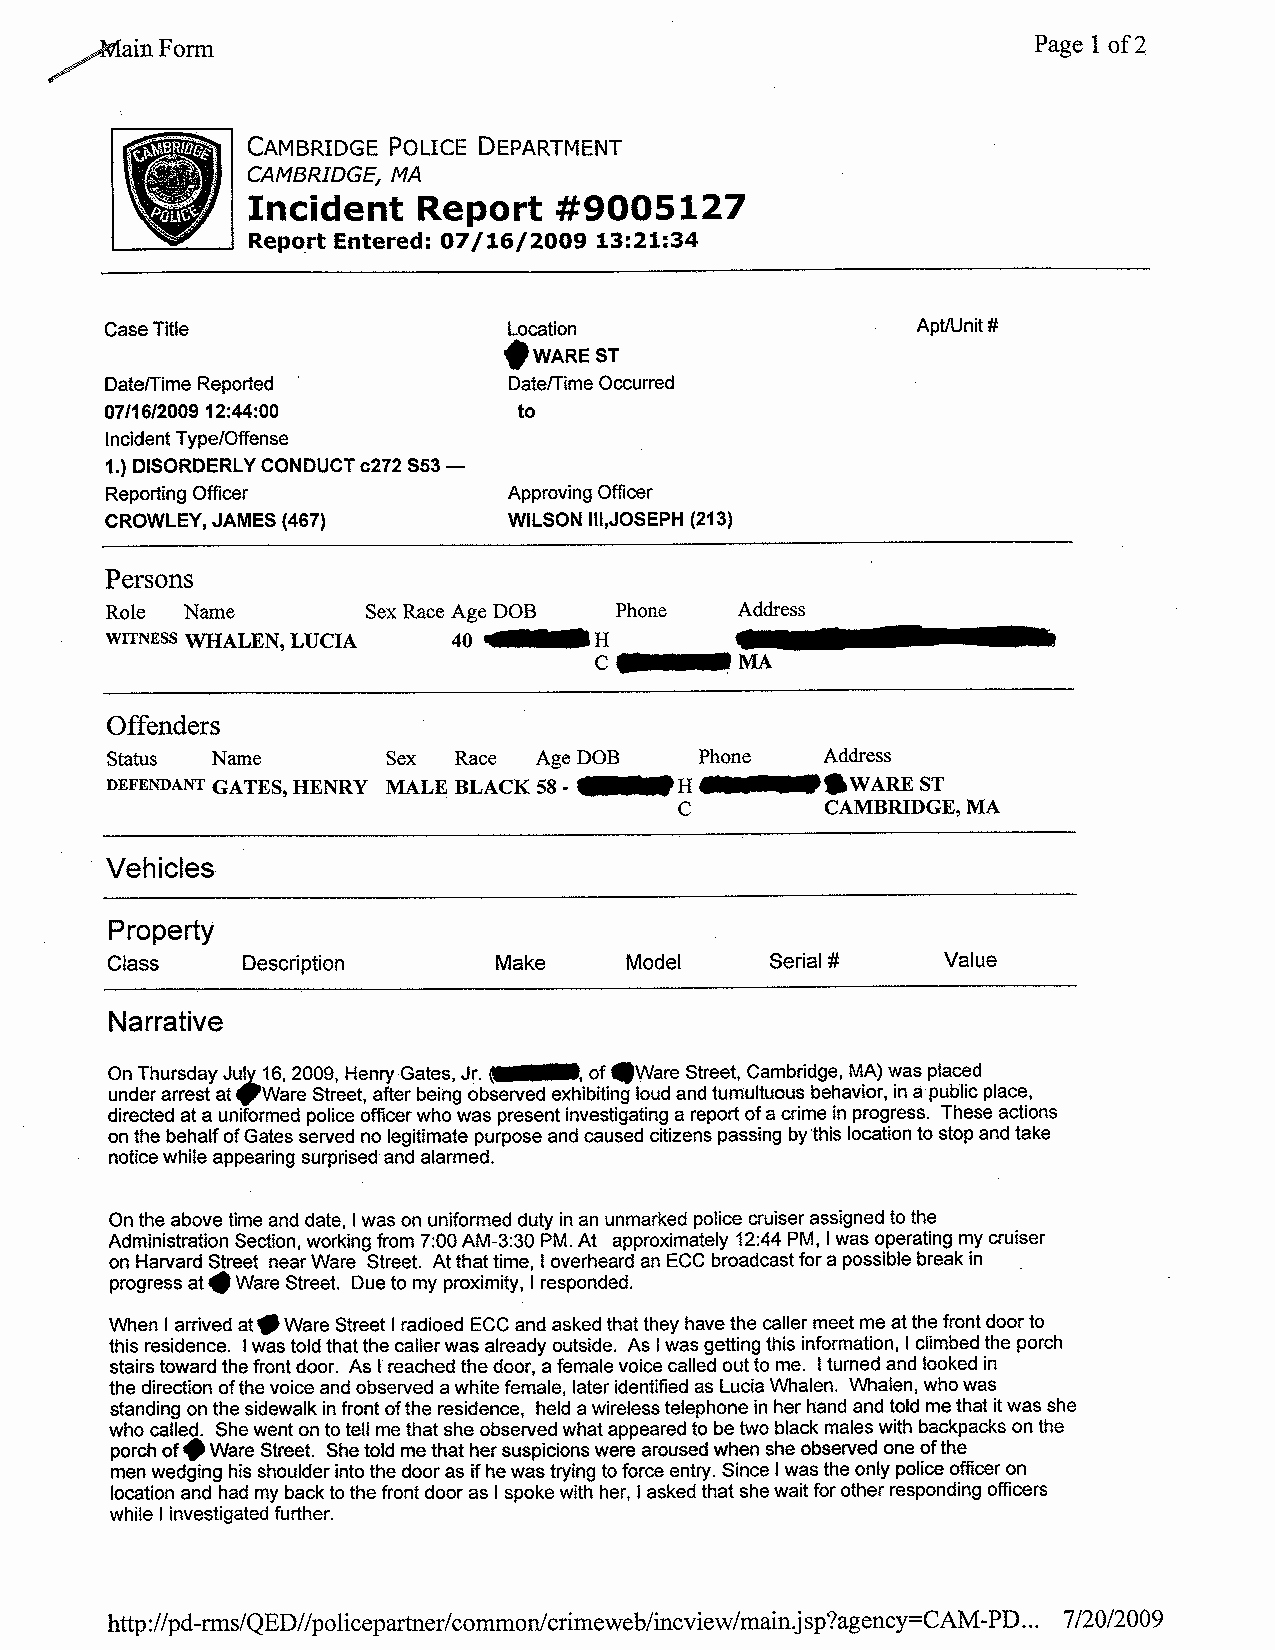 Police Arrest Report Template New Police Report Template Invitation Templates Police